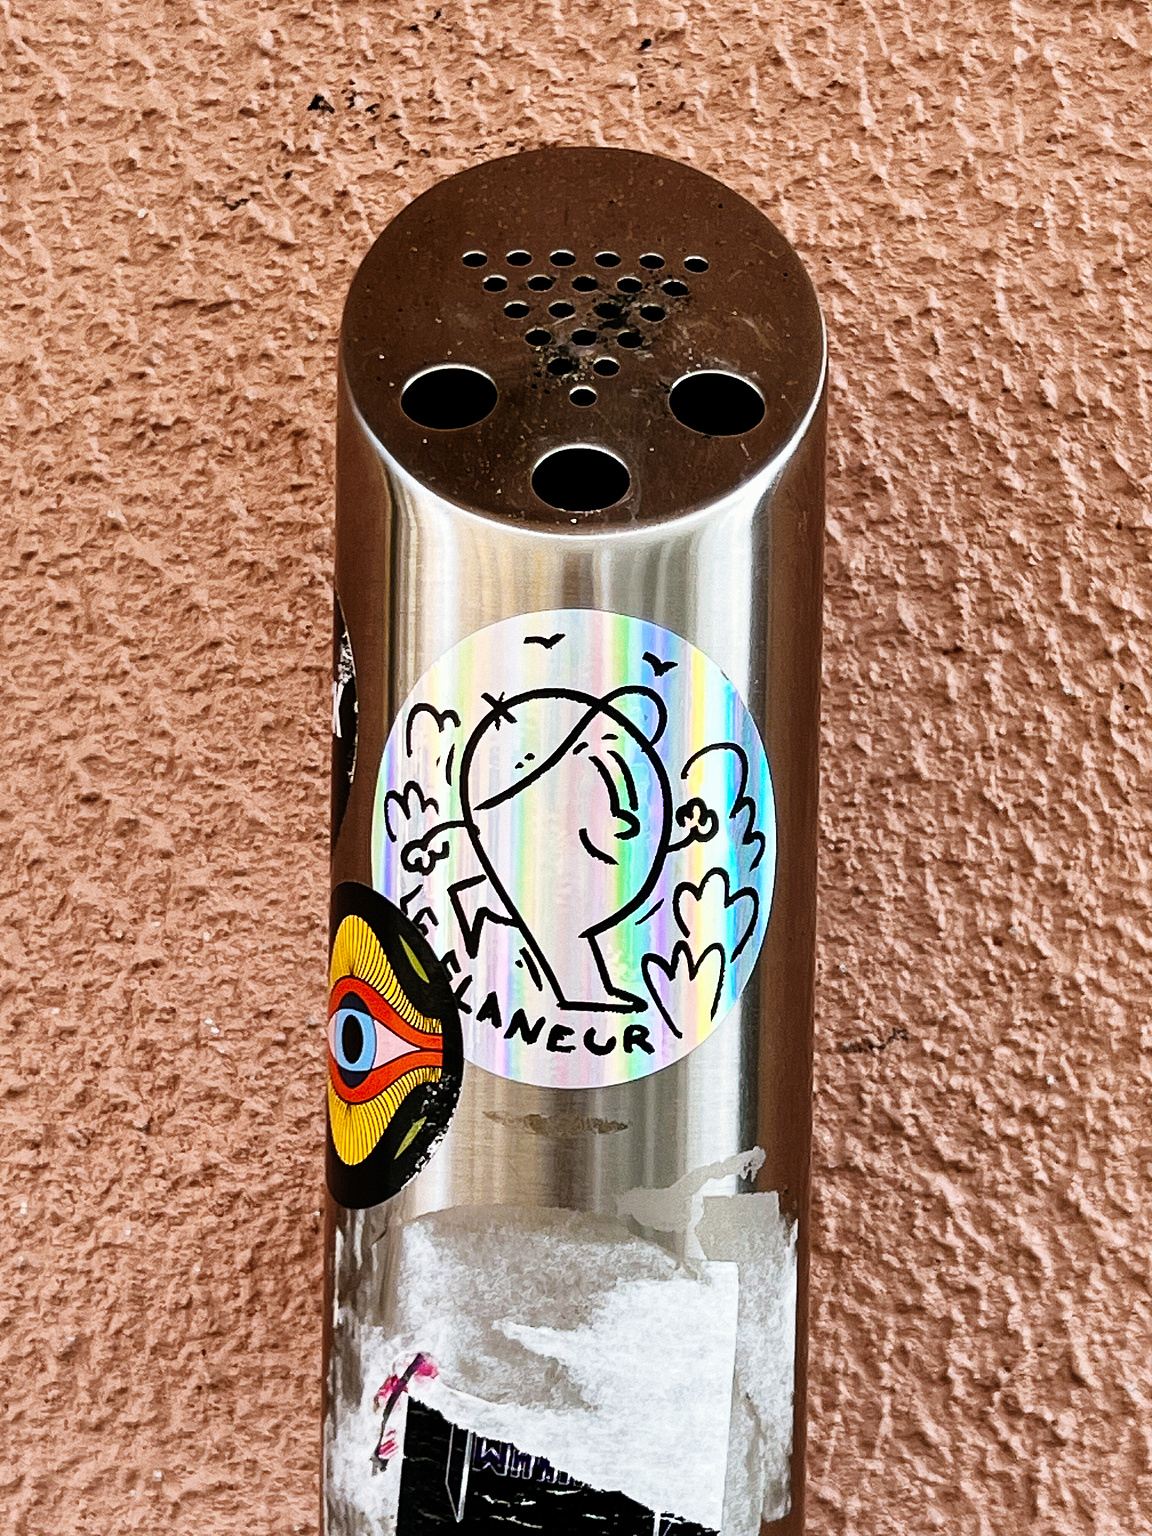 A cylindrical ashtray adorned with stickers and graffiti against a textured wall.